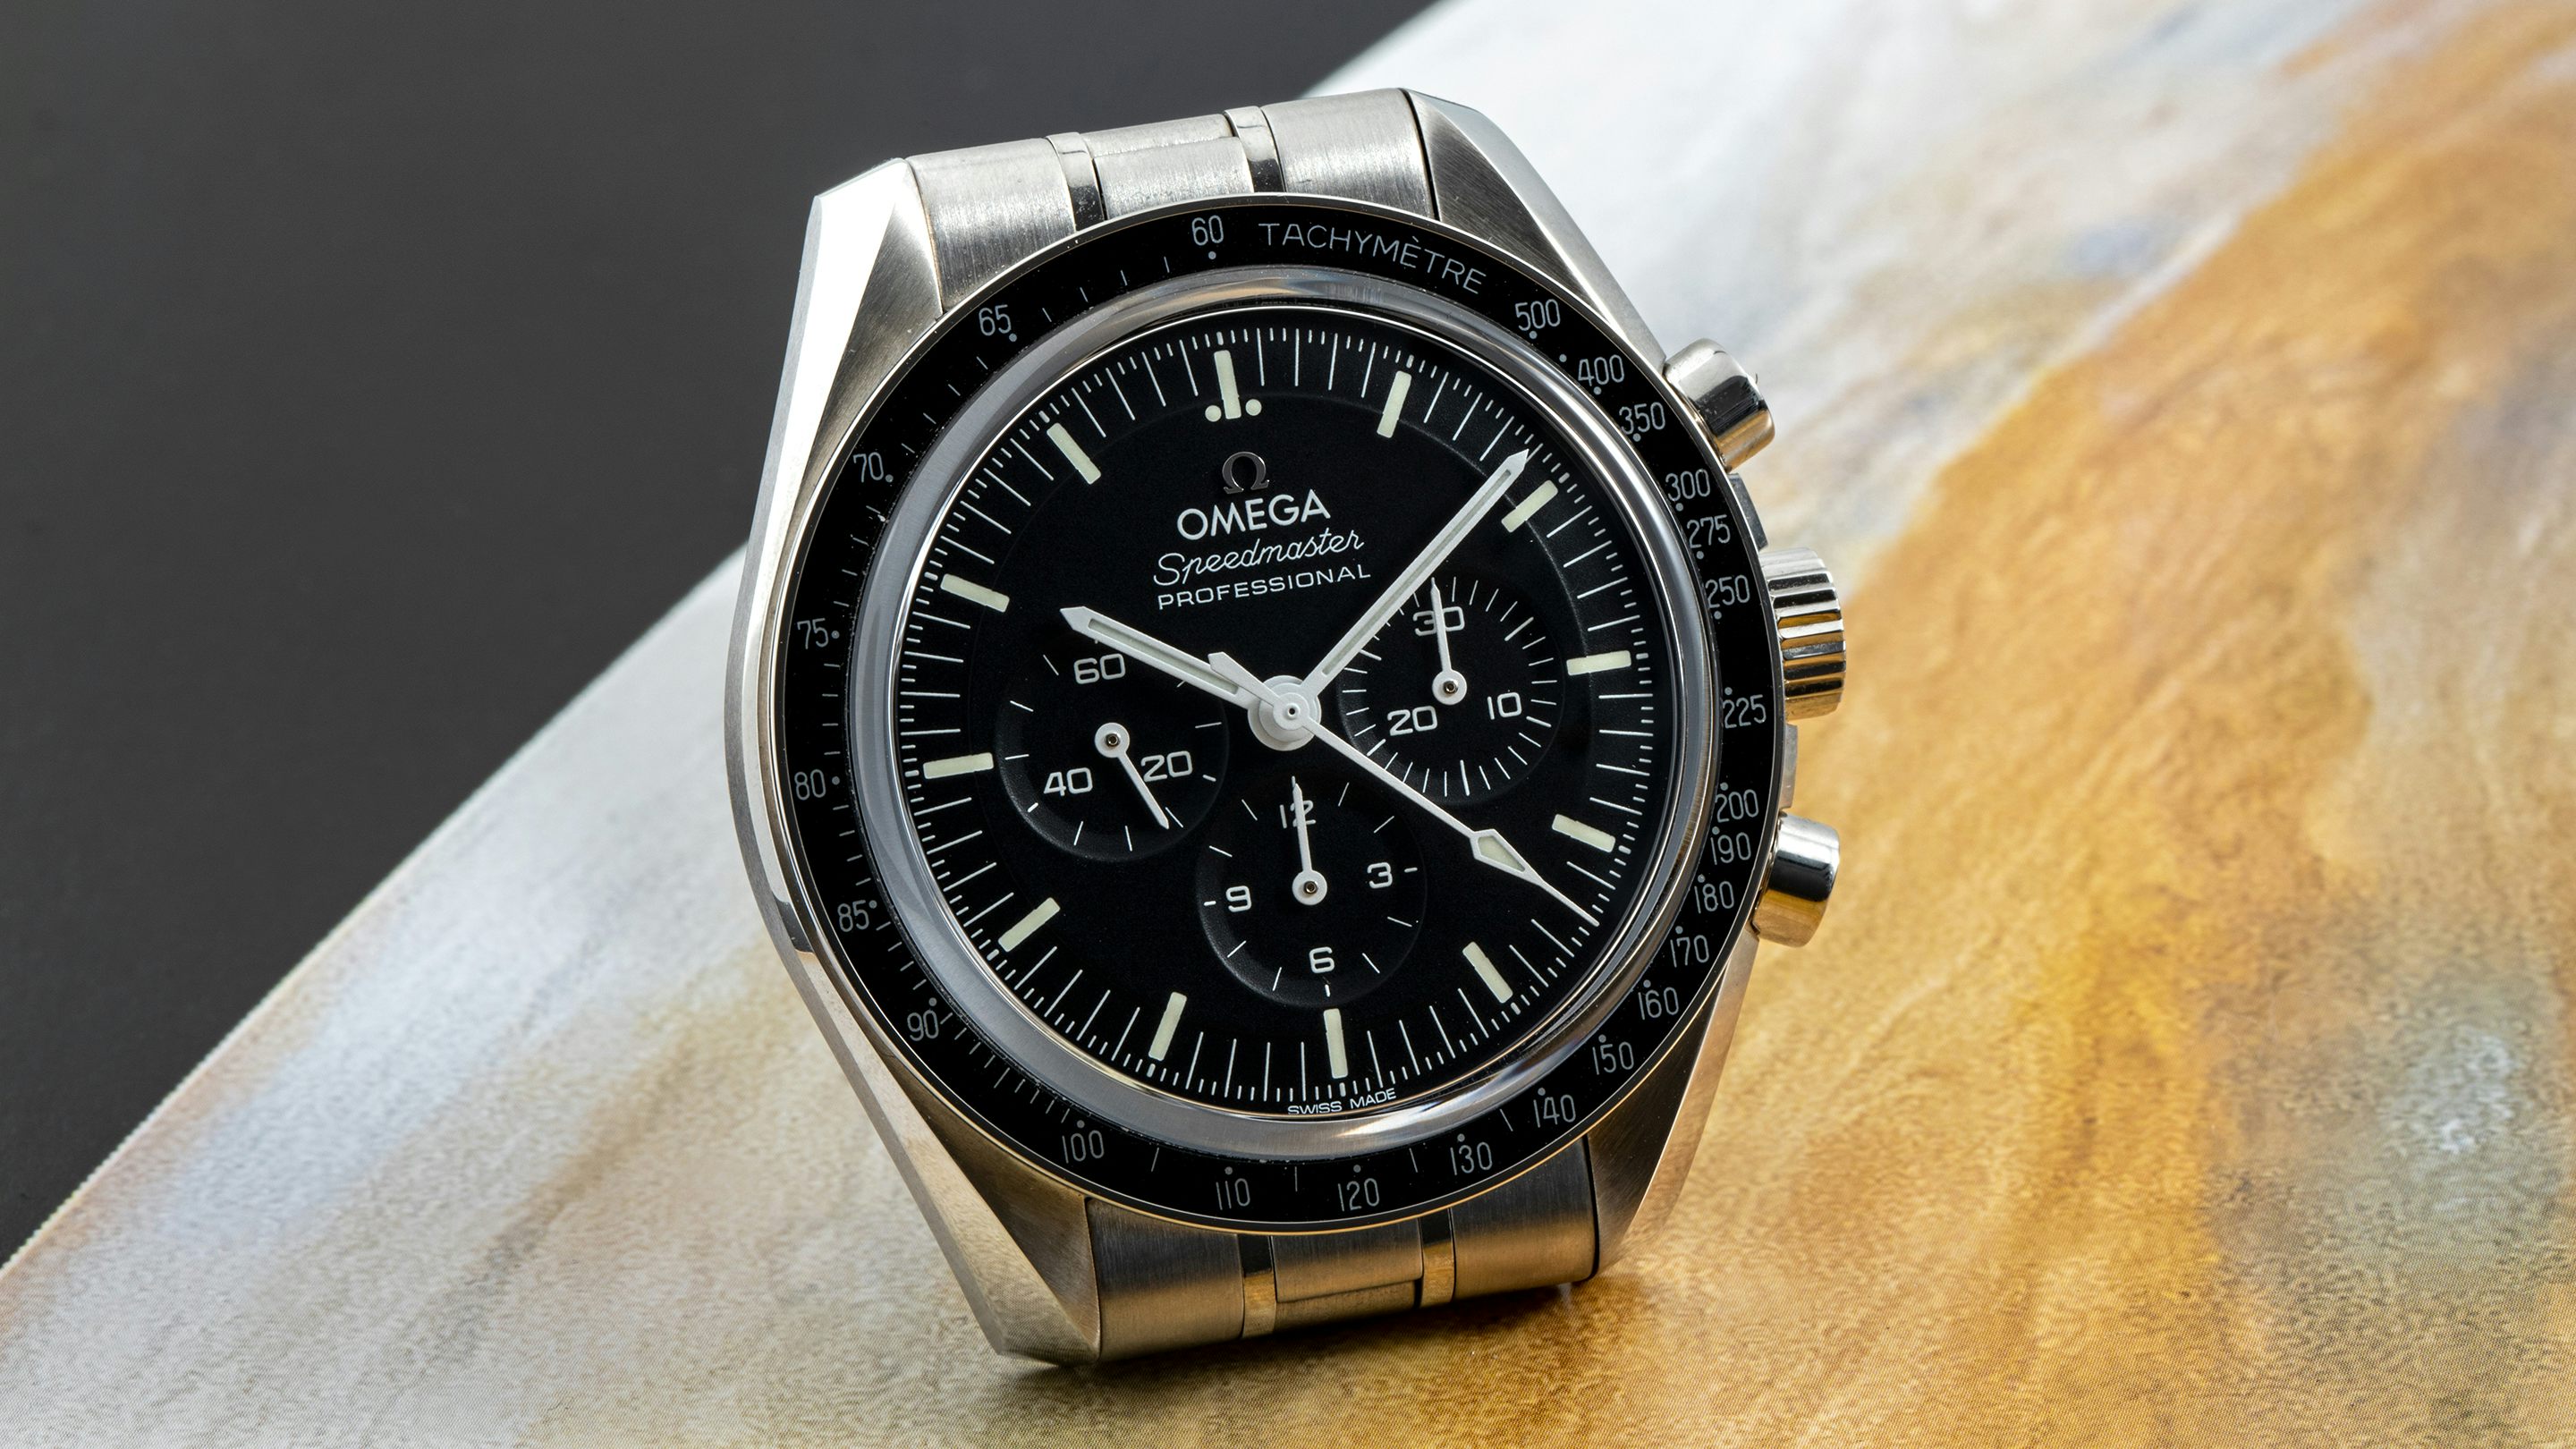 A Week On The Wrist: The Omega Speedmaster Professional Moonwatch